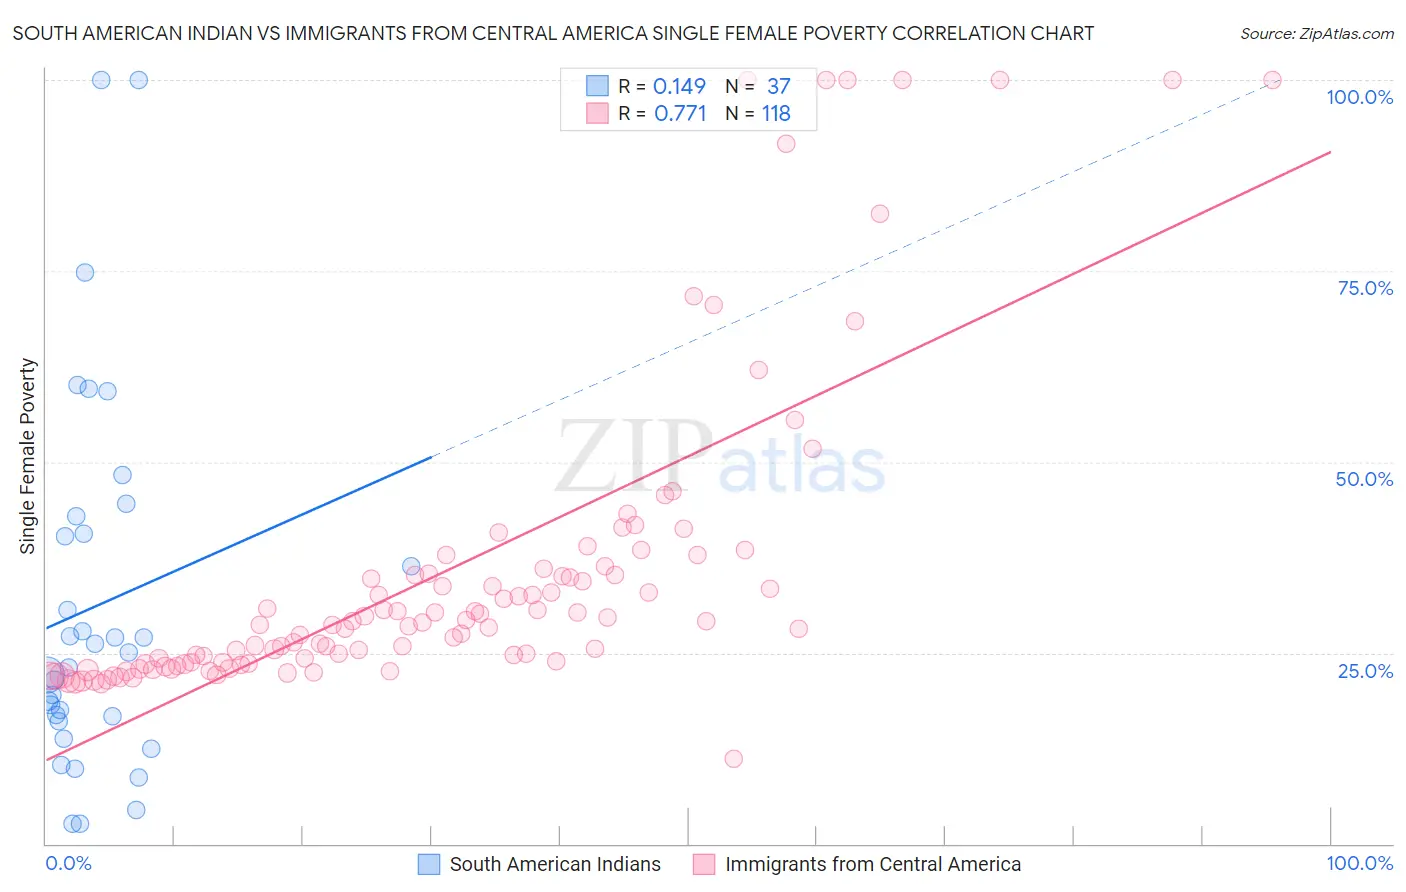 South American Indian vs Immigrants from Central America Single Female Poverty